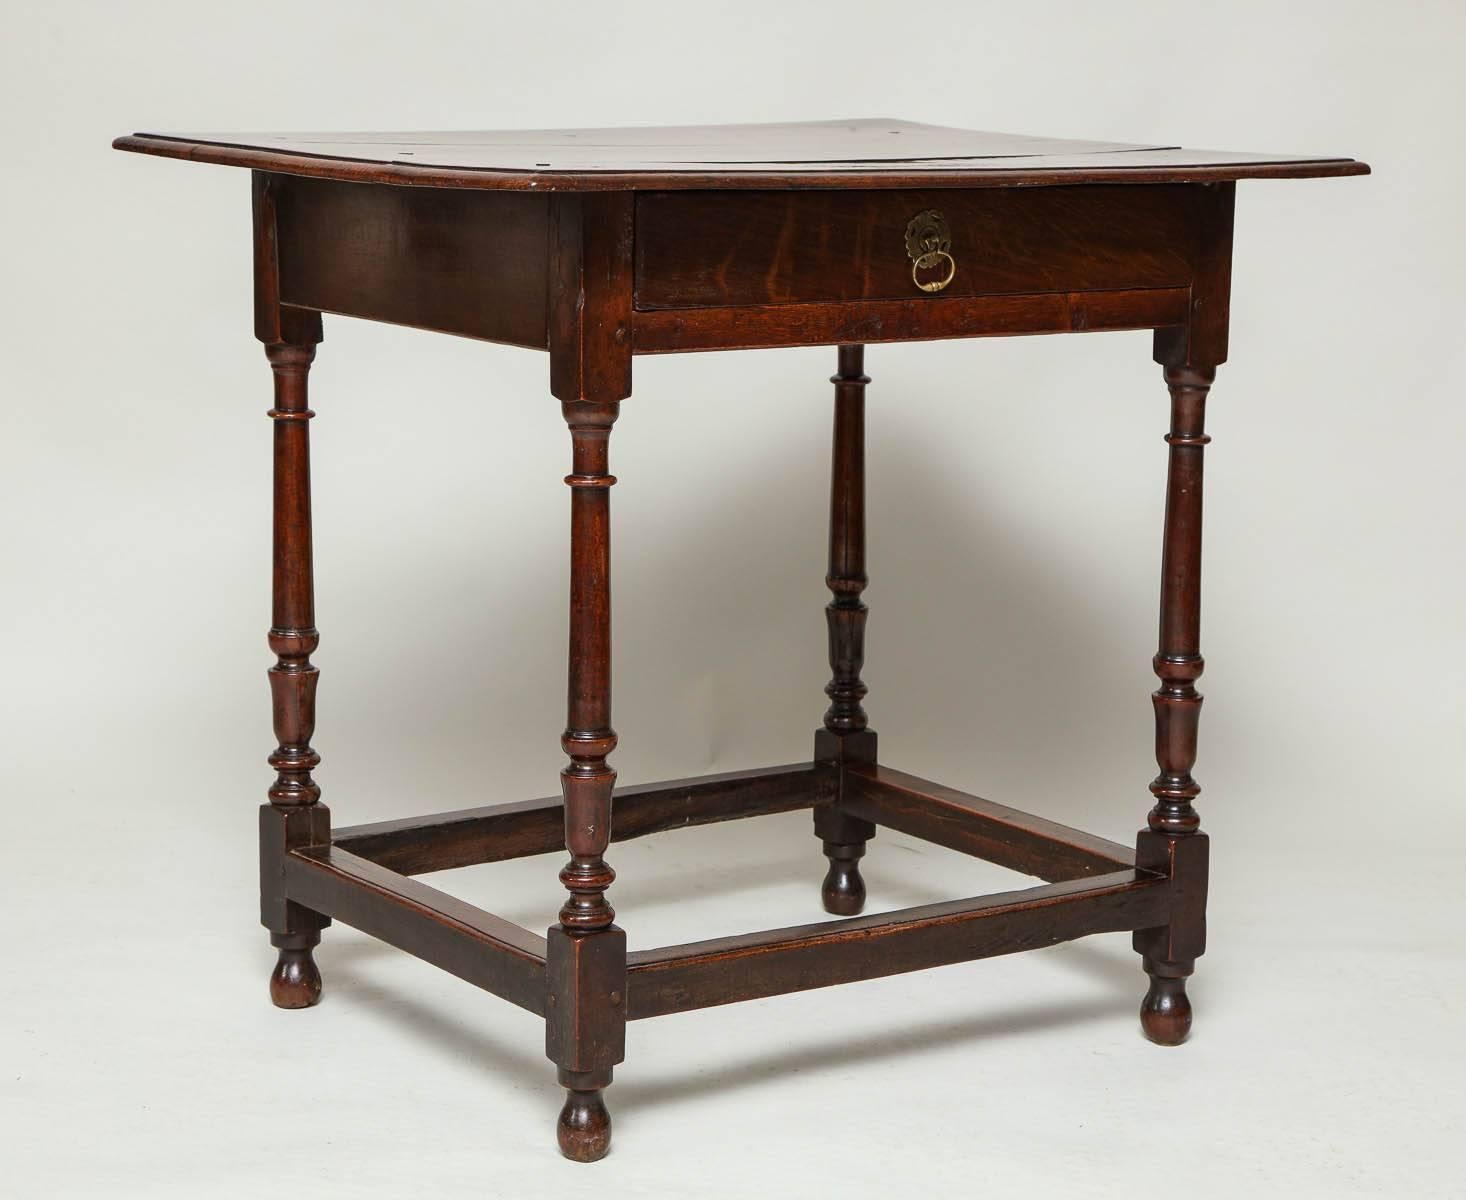 Good English country oak and fruitwood side table, the thumb molded top over vase and ring turned legs, single drawer with central pull, joined by molded box stretcher and standing proud on original egg feet, the whole with excellent color.